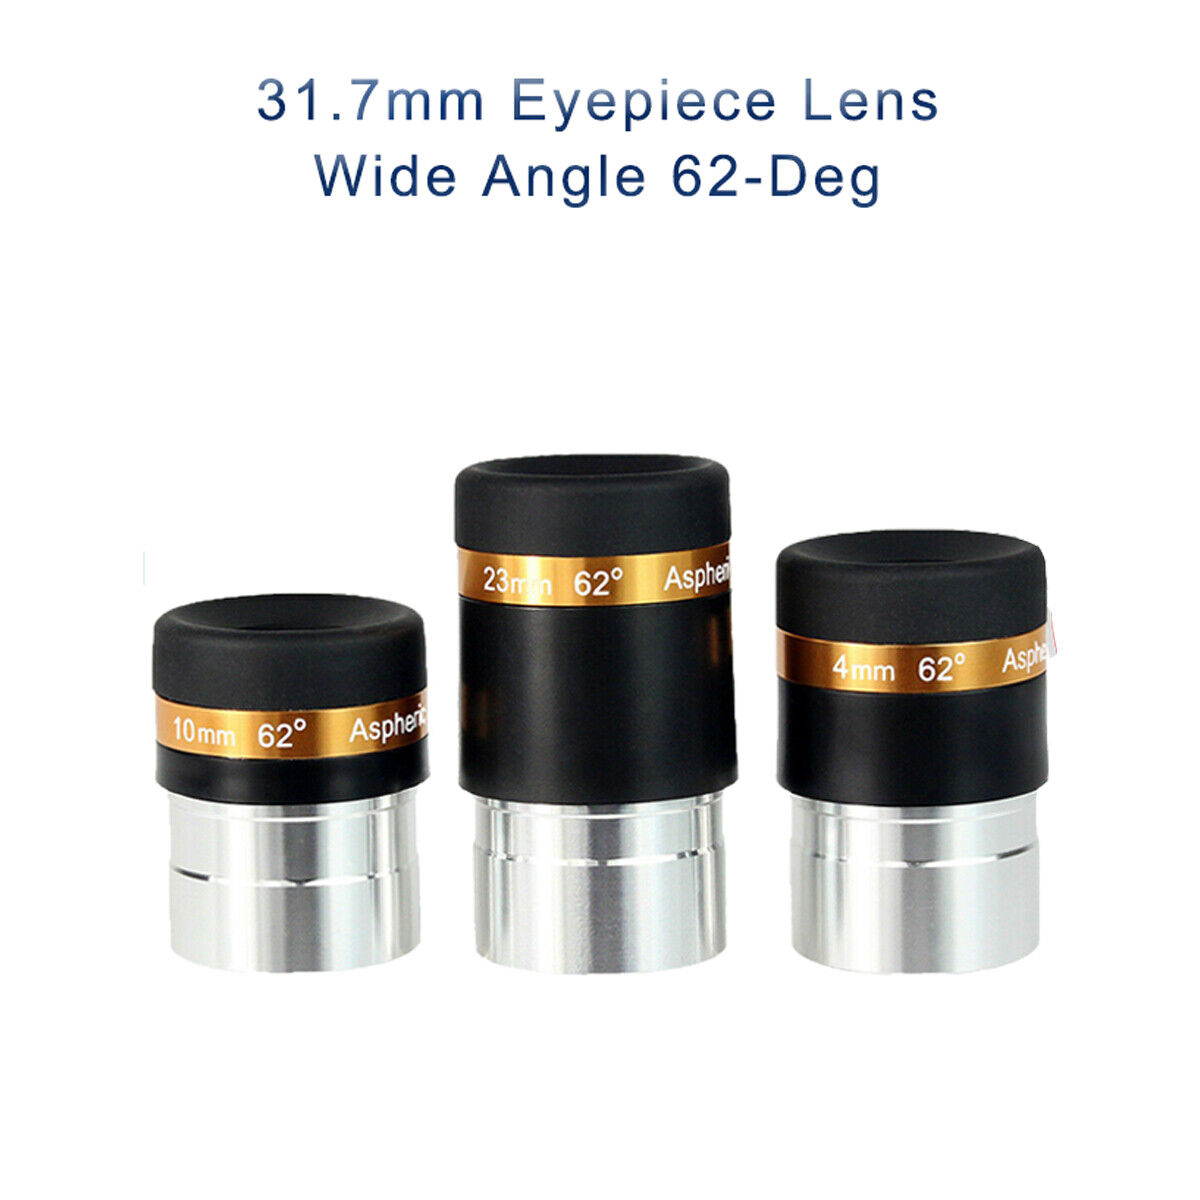 SVBONY 1.25inch HD 4/10/23mm Wide Angle 62° Aspheric Telescope Eyepieces Set